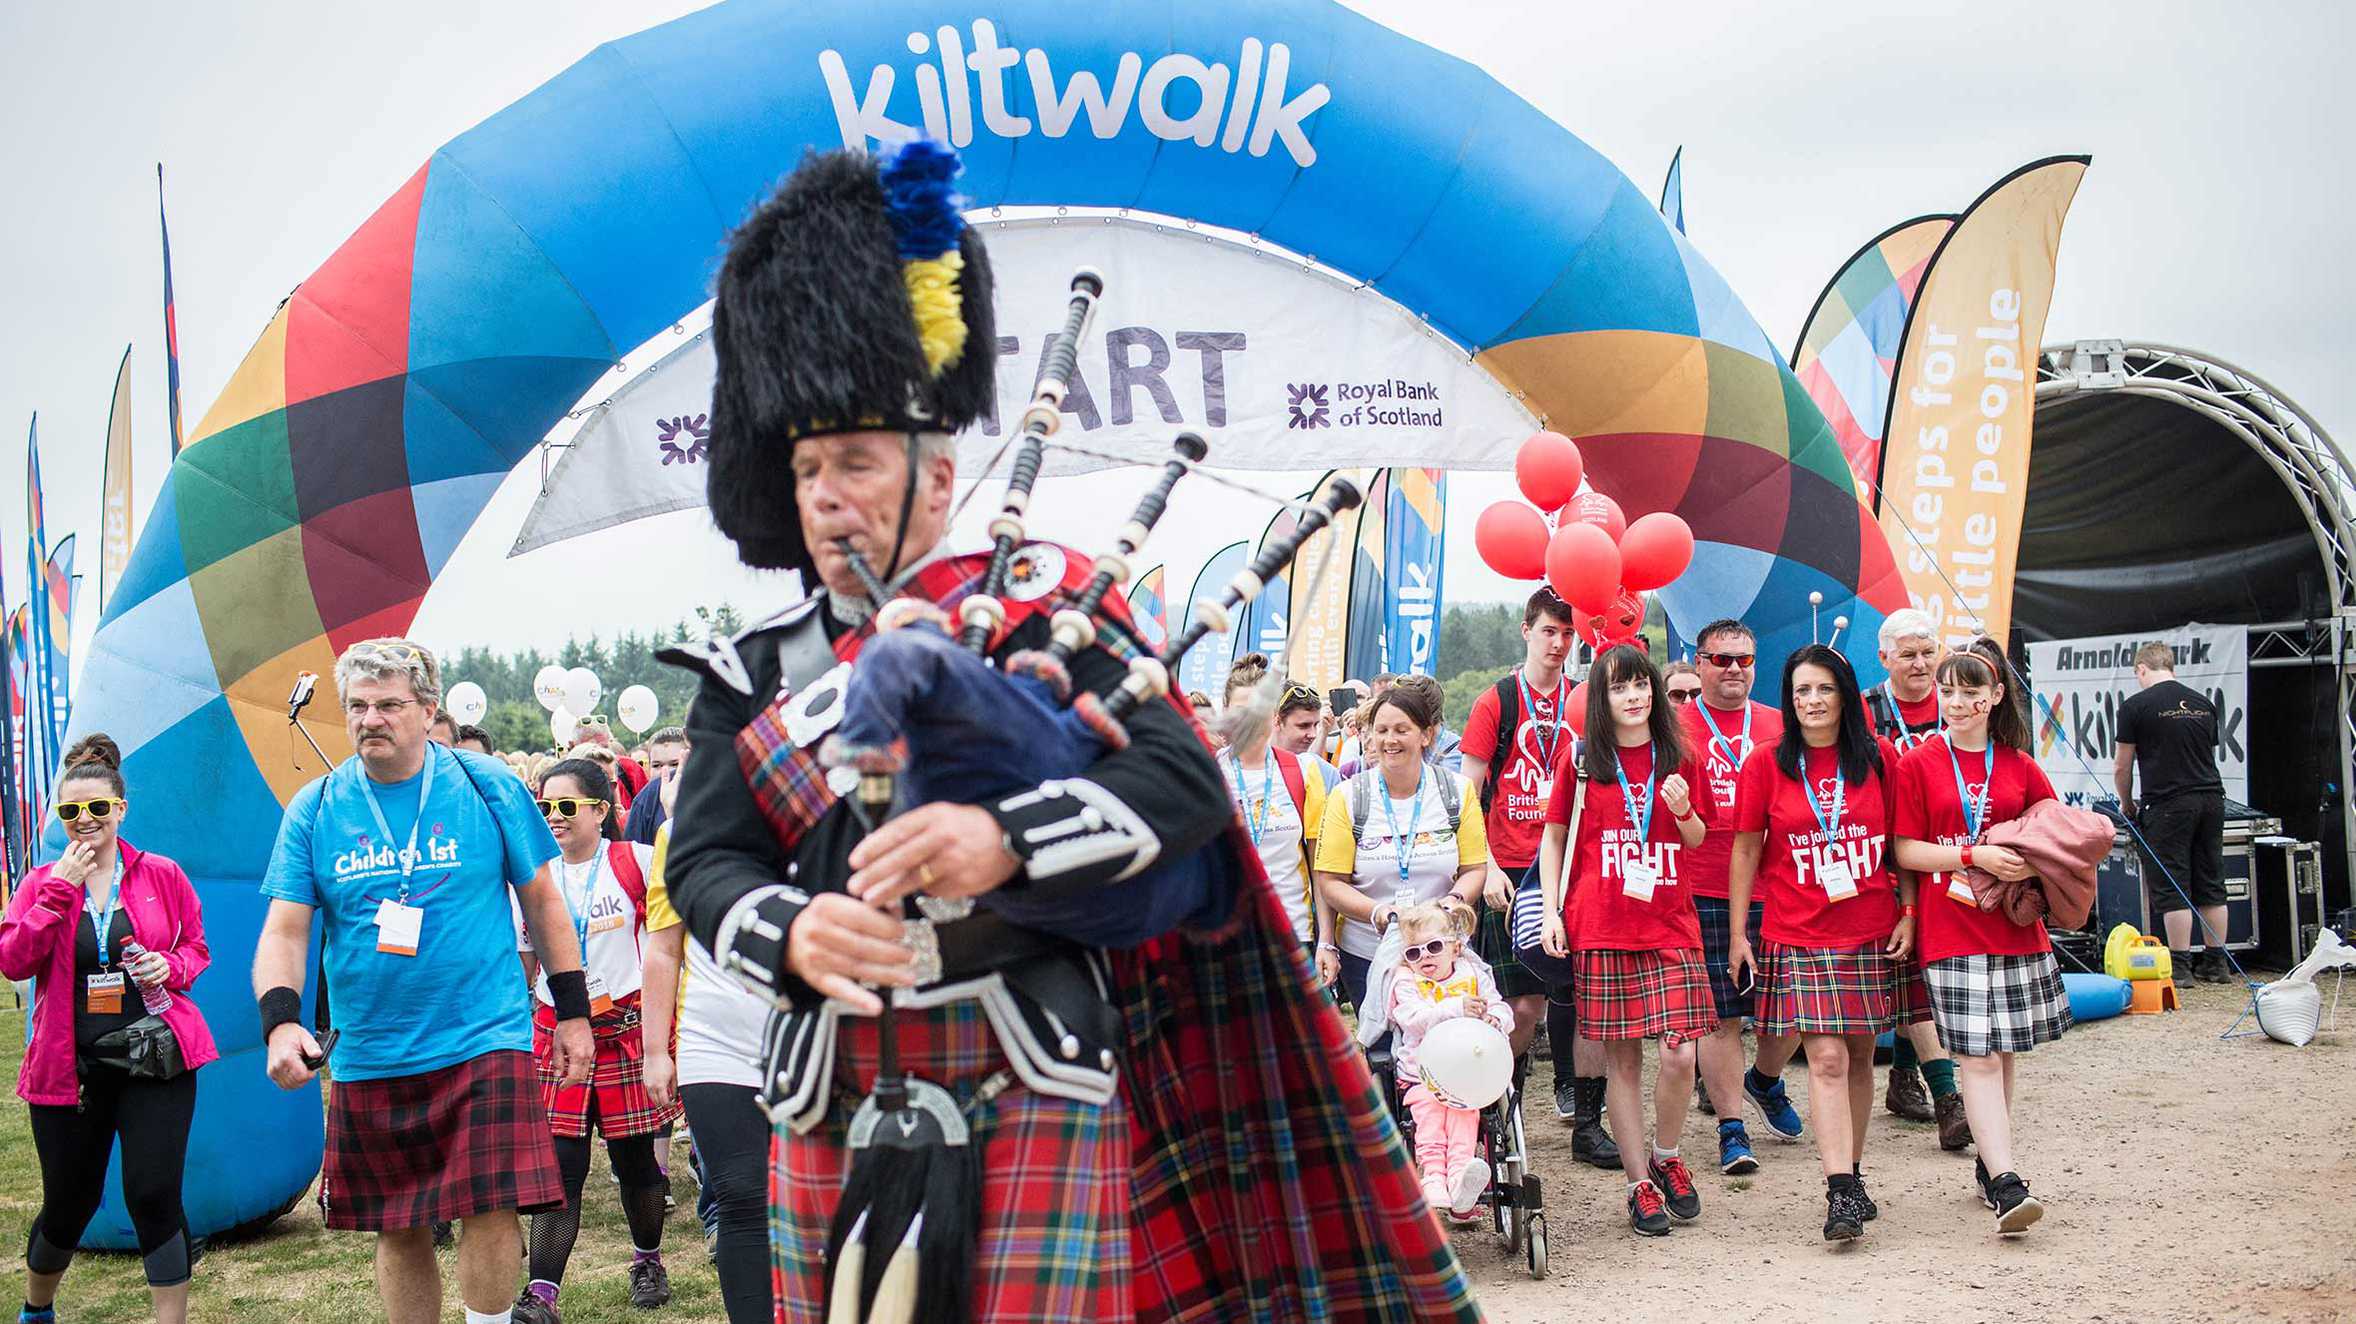 A crowd of enthusiastic walkers setting off on the Kiltwalk